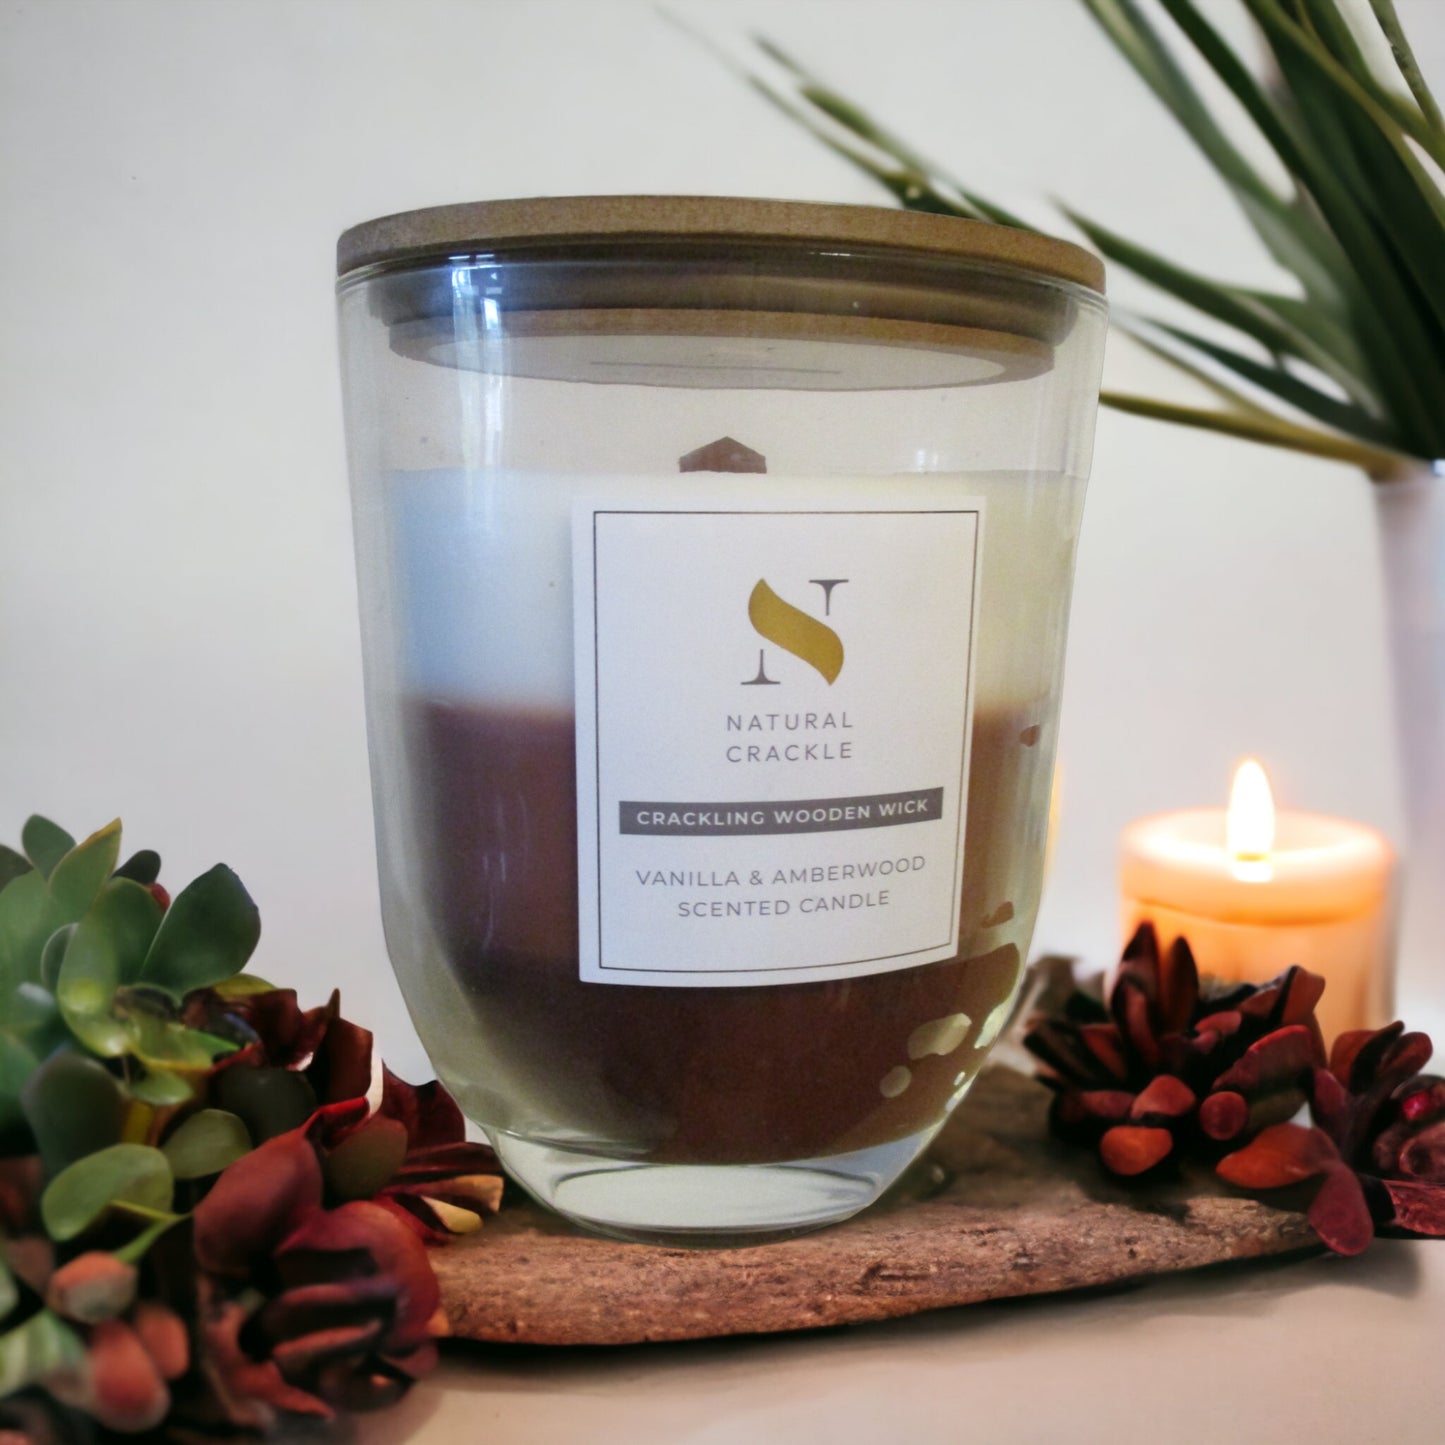 Natural Crackle - Wood Crackling Wick Candles